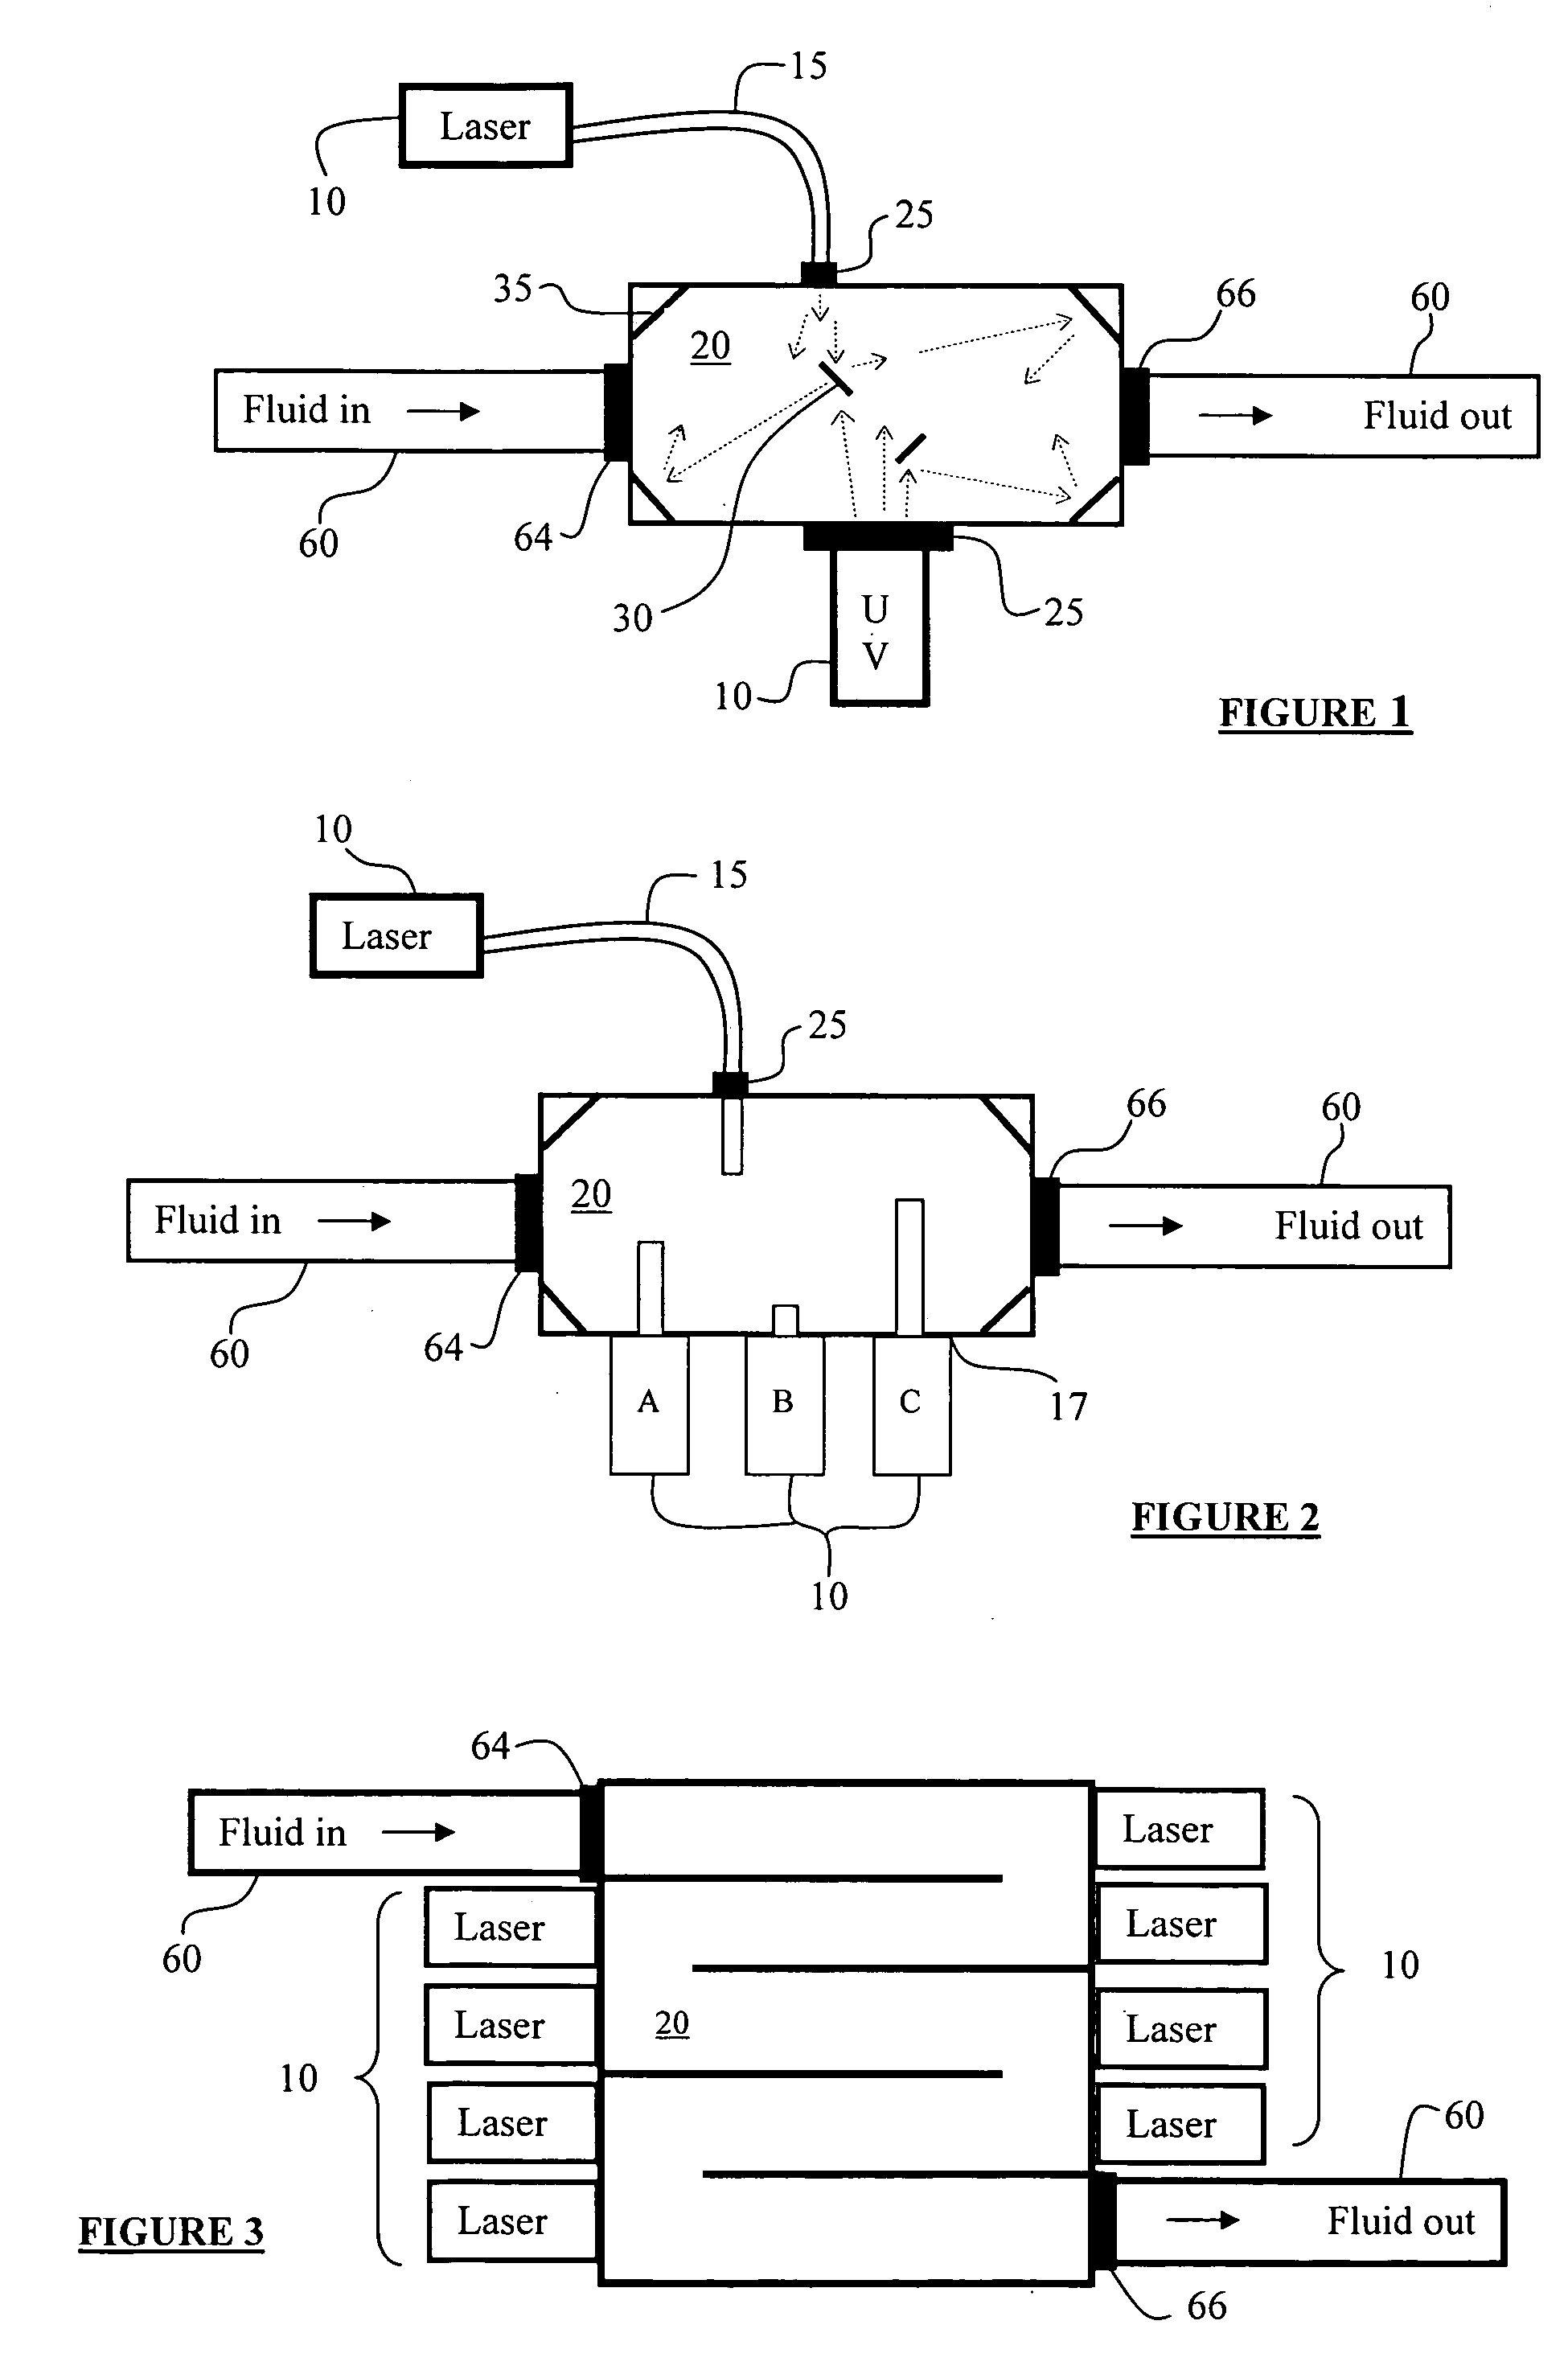 Systems and methods for contaminant detection within a fluid, ultraviolet treatment and status notification